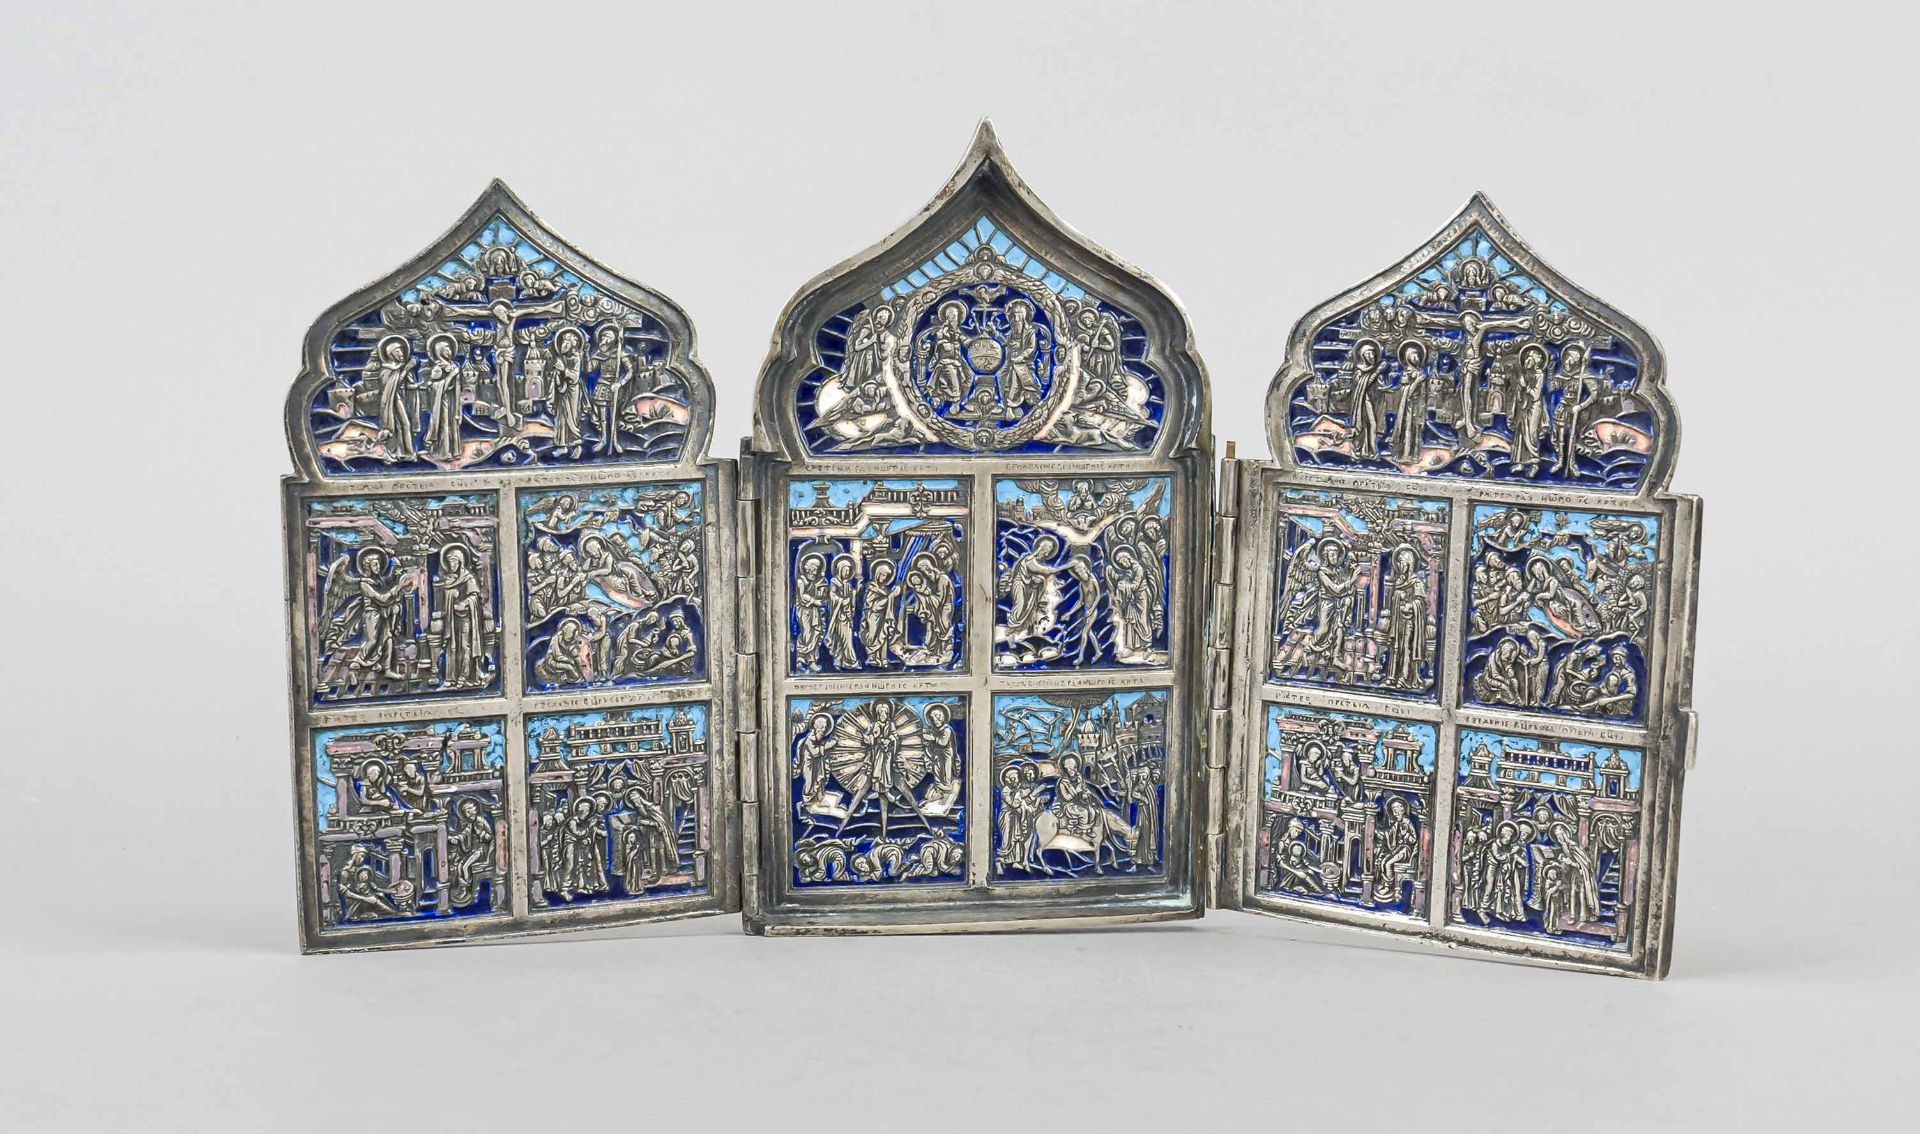 Three-part travel icon, Russia, square plates with curved finial, the interior with multi-figure